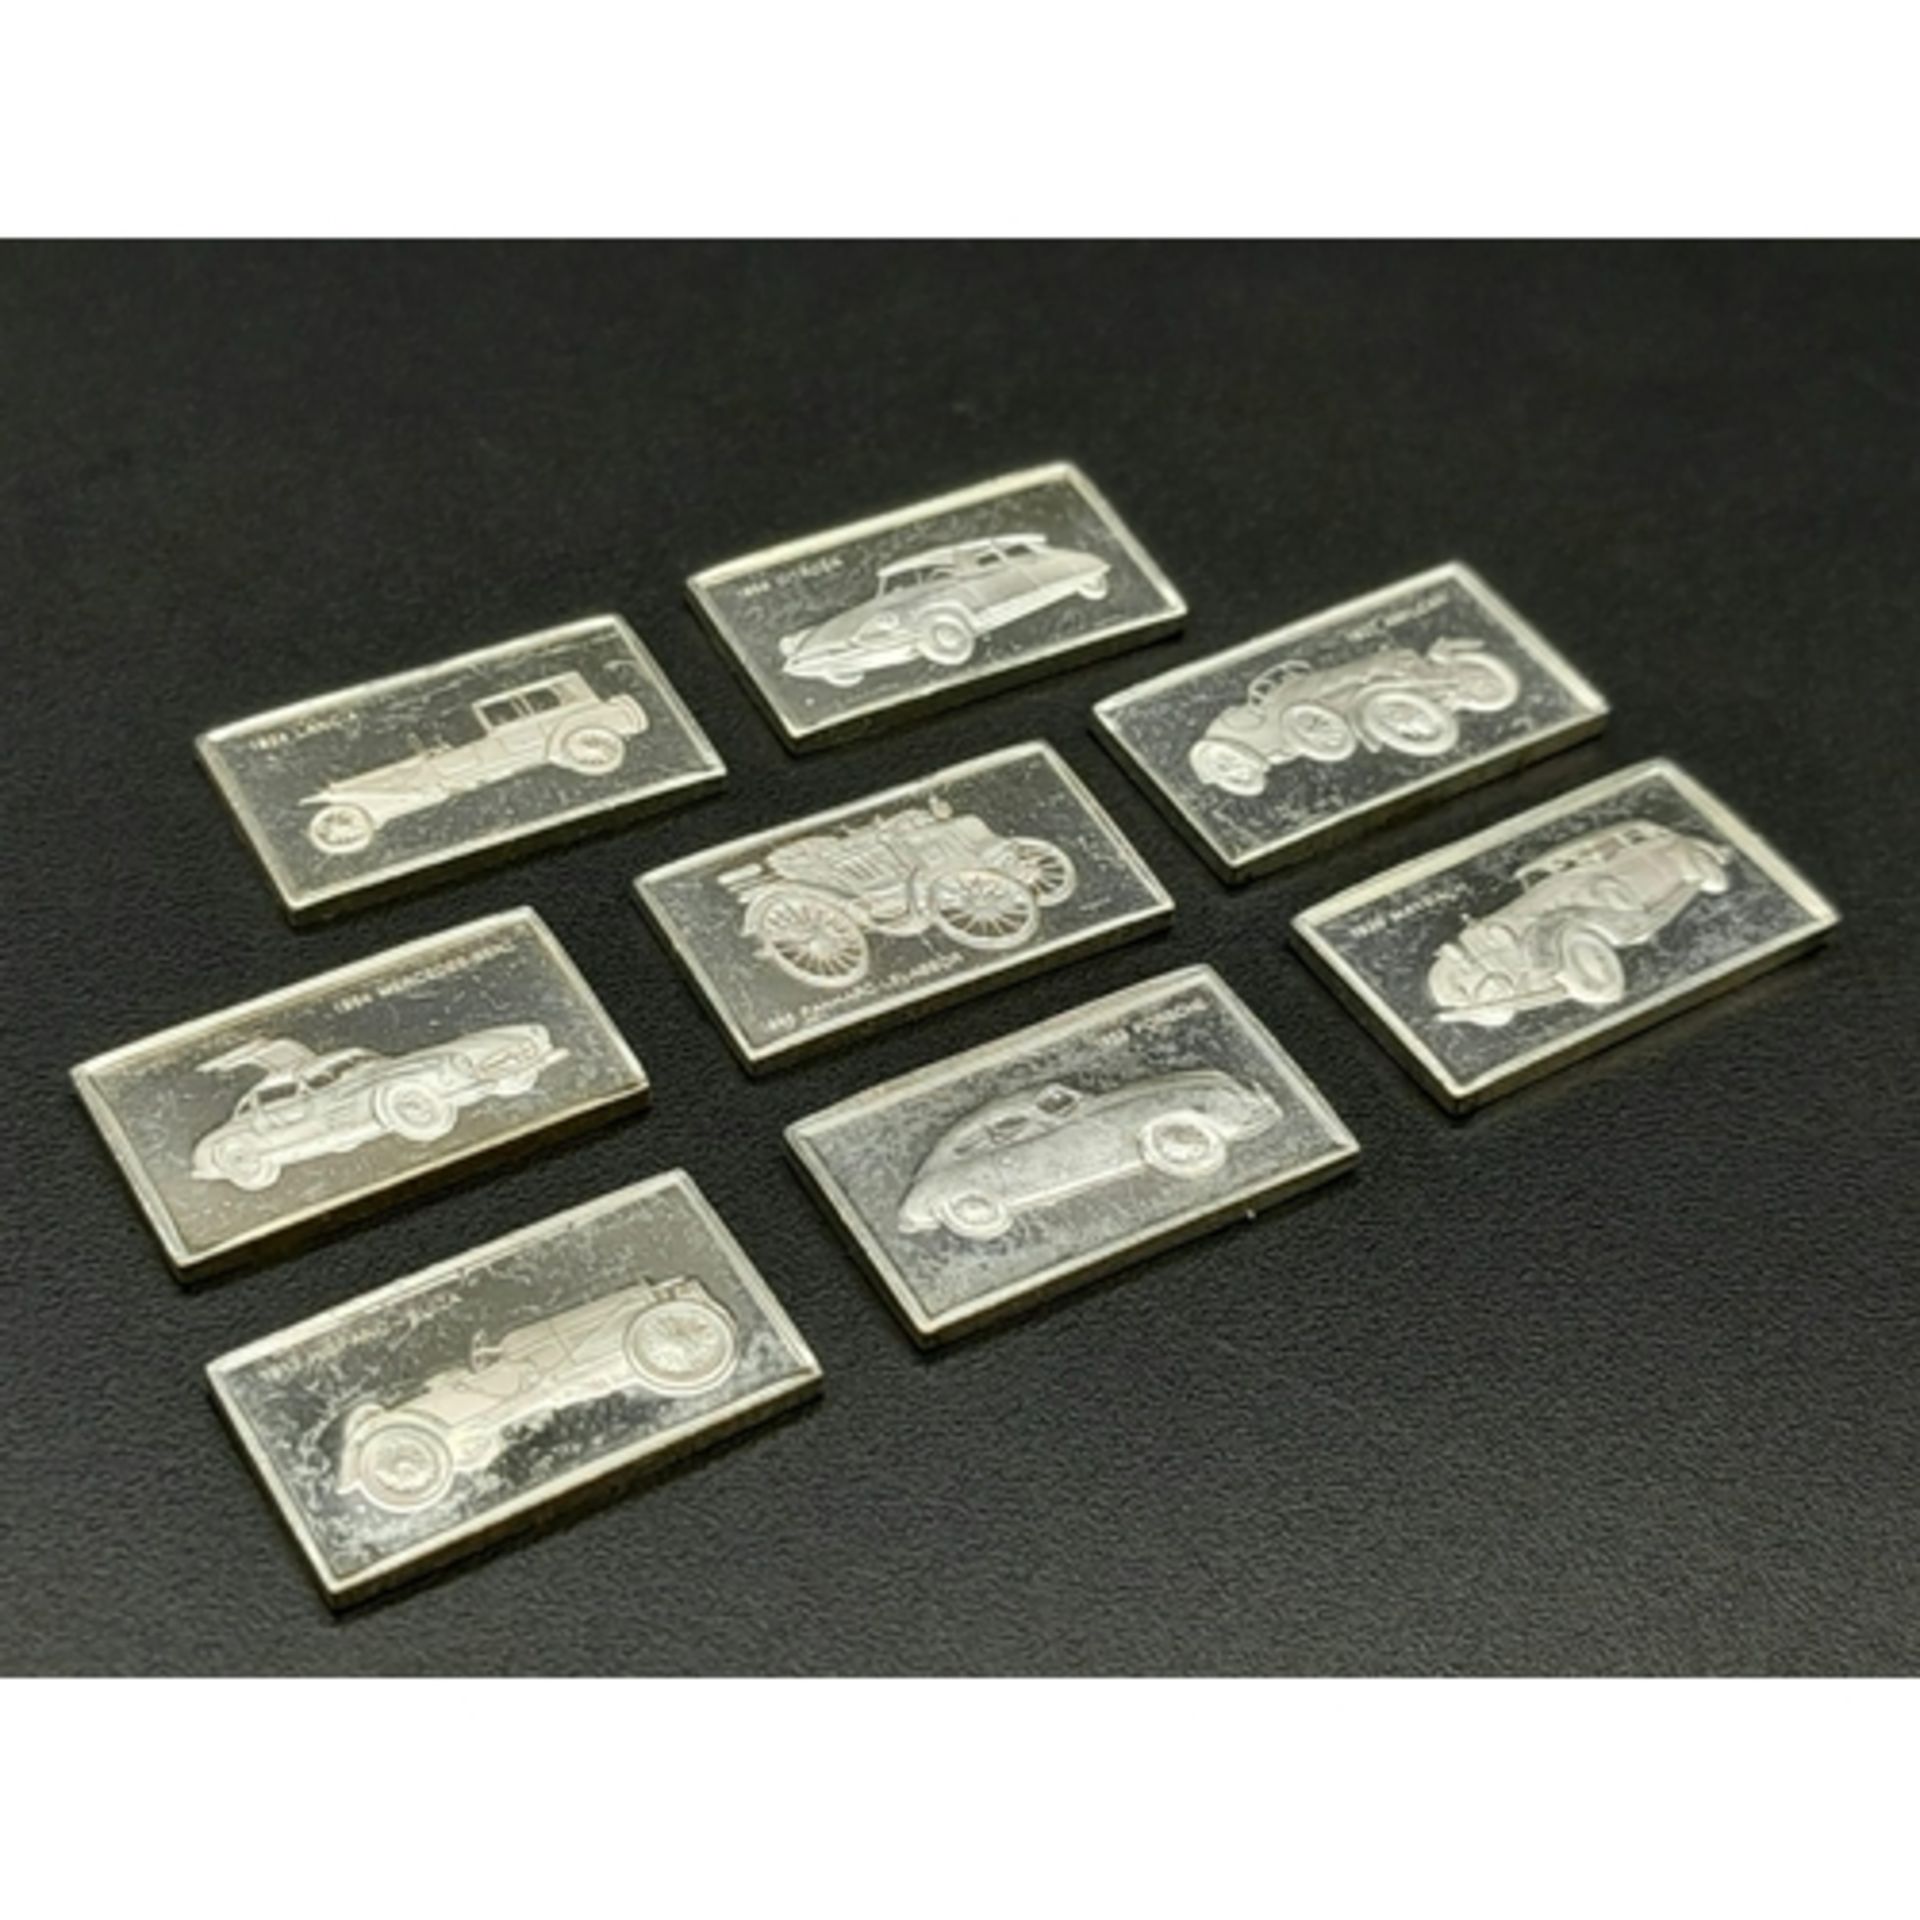 A Selection of 8 Sterling Silver European Car Manufacturer Plaques - Citreon, Mayback, Hispano-